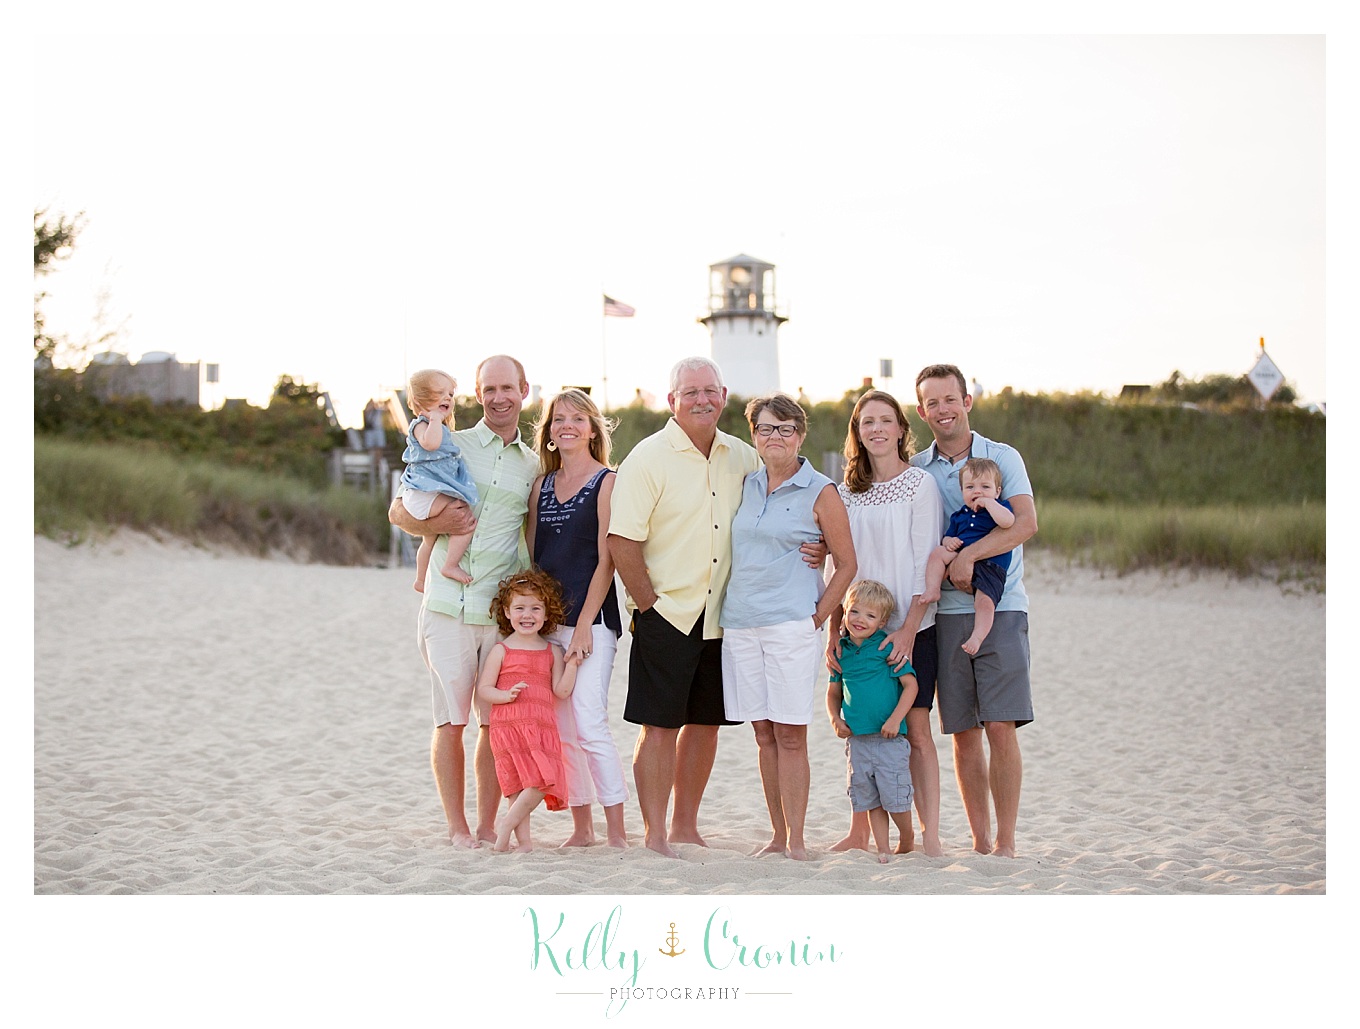 An extended family stands on the shore | Kelly Cronin Photography | Seaside Photography